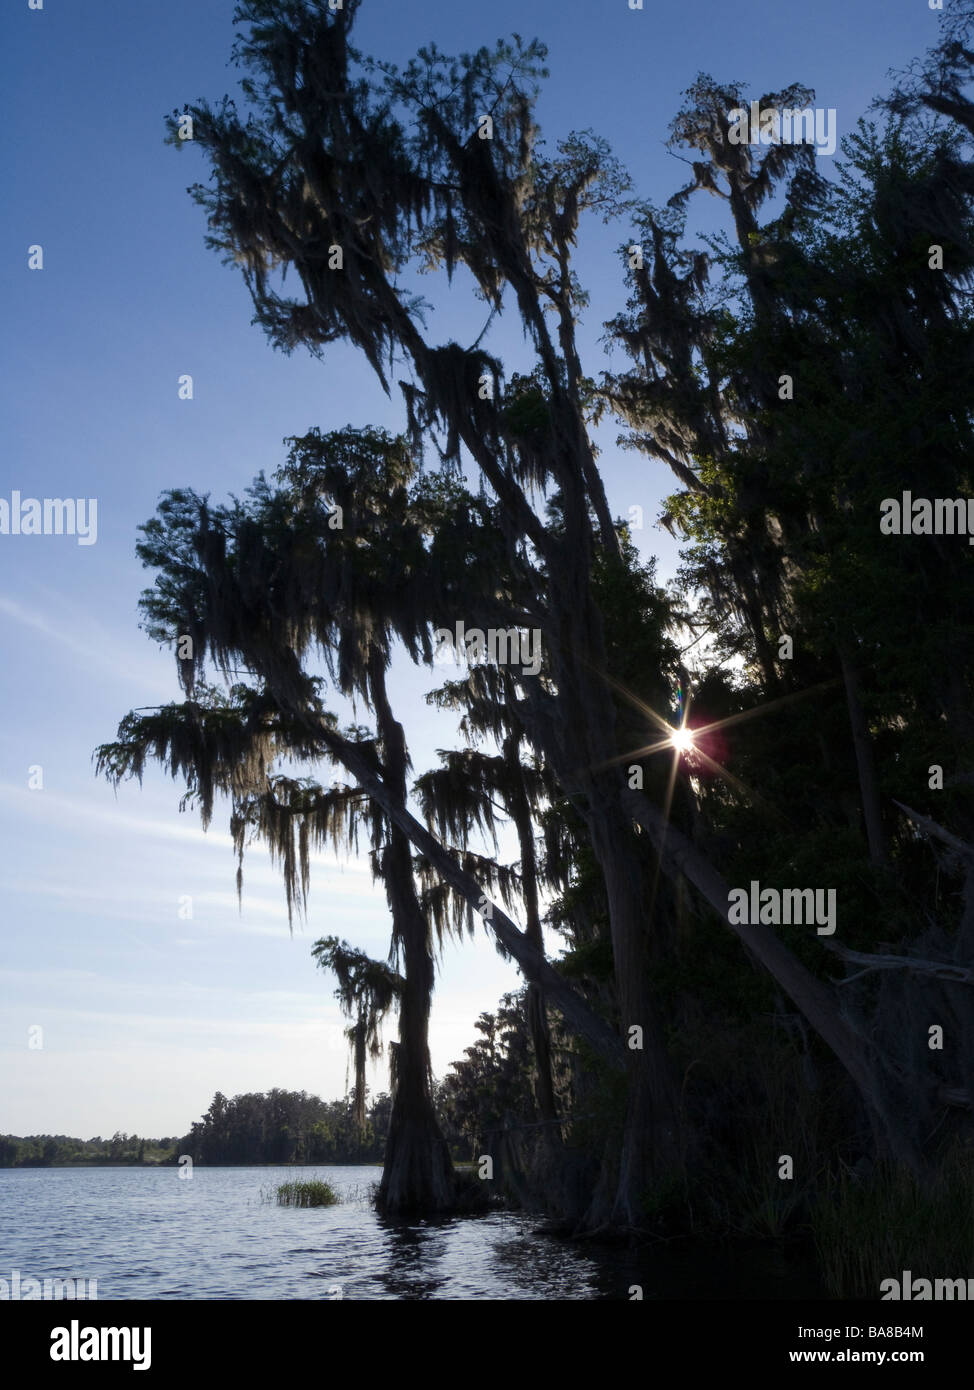 Bald Cypress trees draped with Spanish Moss along shore Lake Louisa State Park Clermont Florida Stock Photo